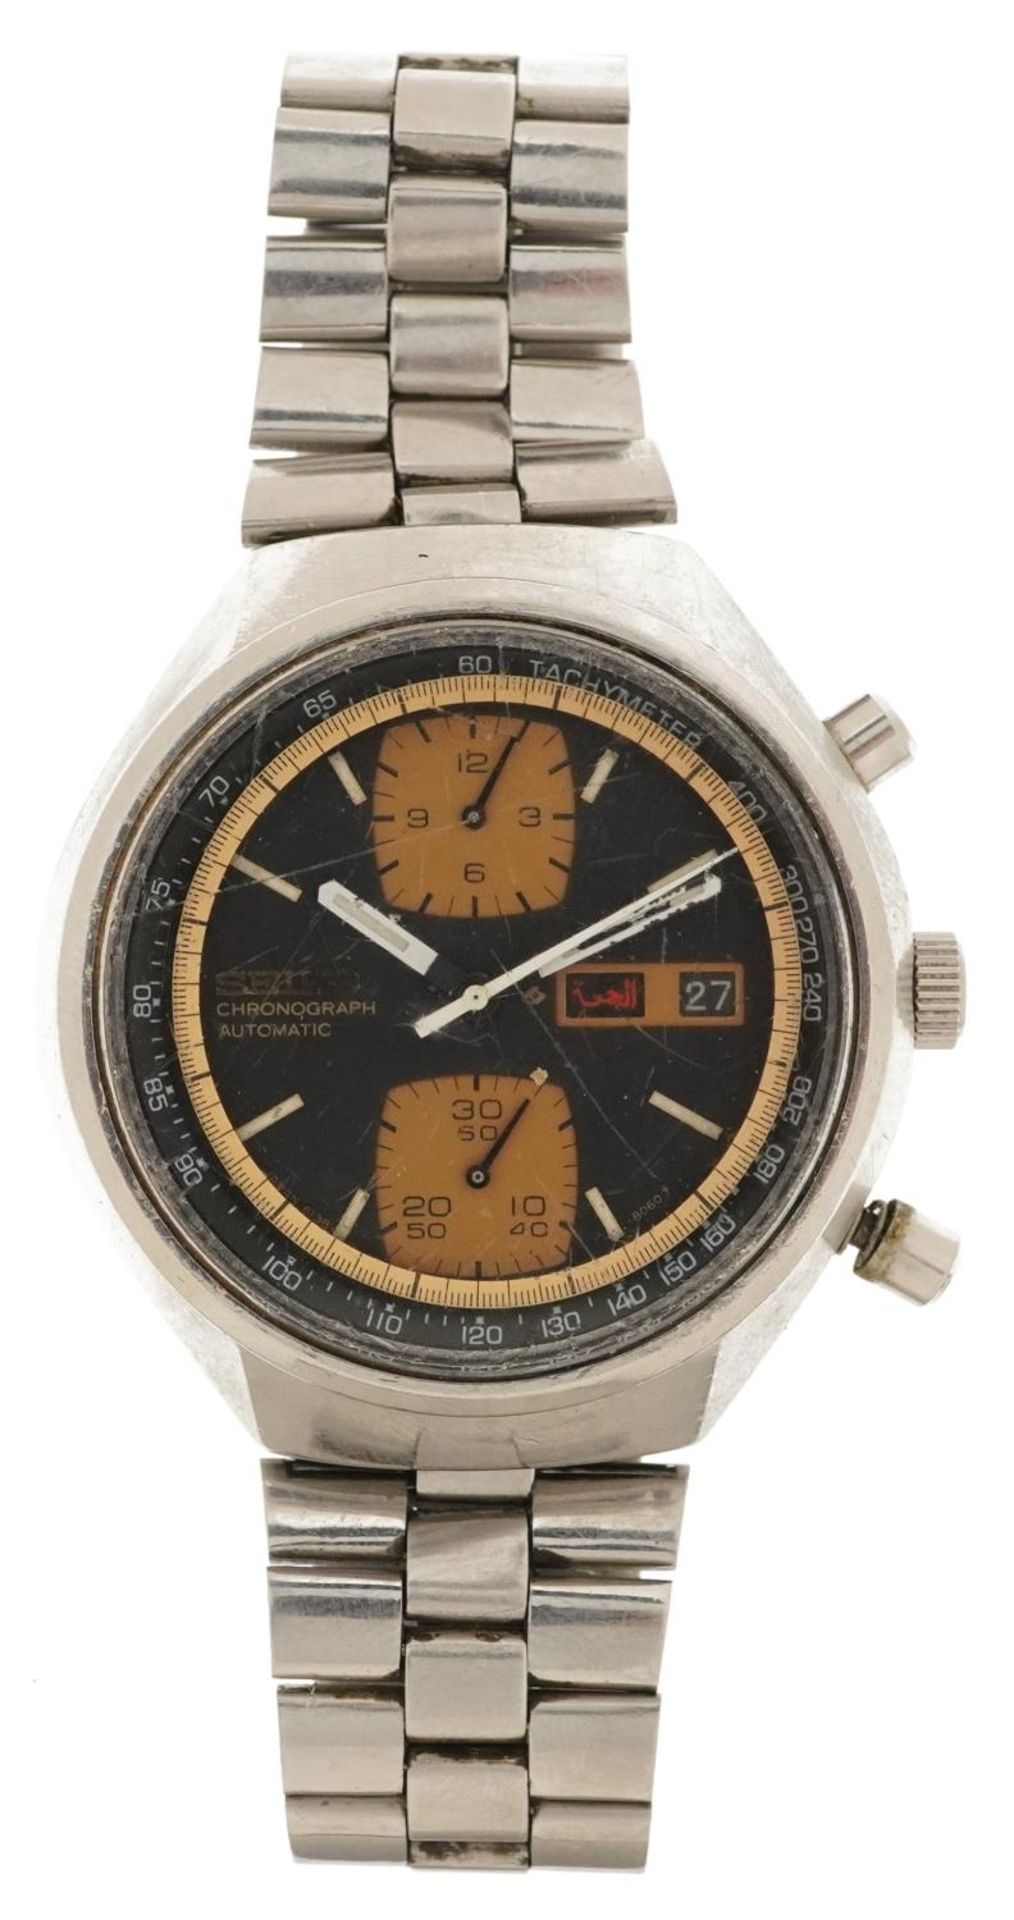 Seiko, gentlemen's 1970s Seiko chronograph automatic 6138-8030 wristwatch with day/date aperture, - Image 2 of 8